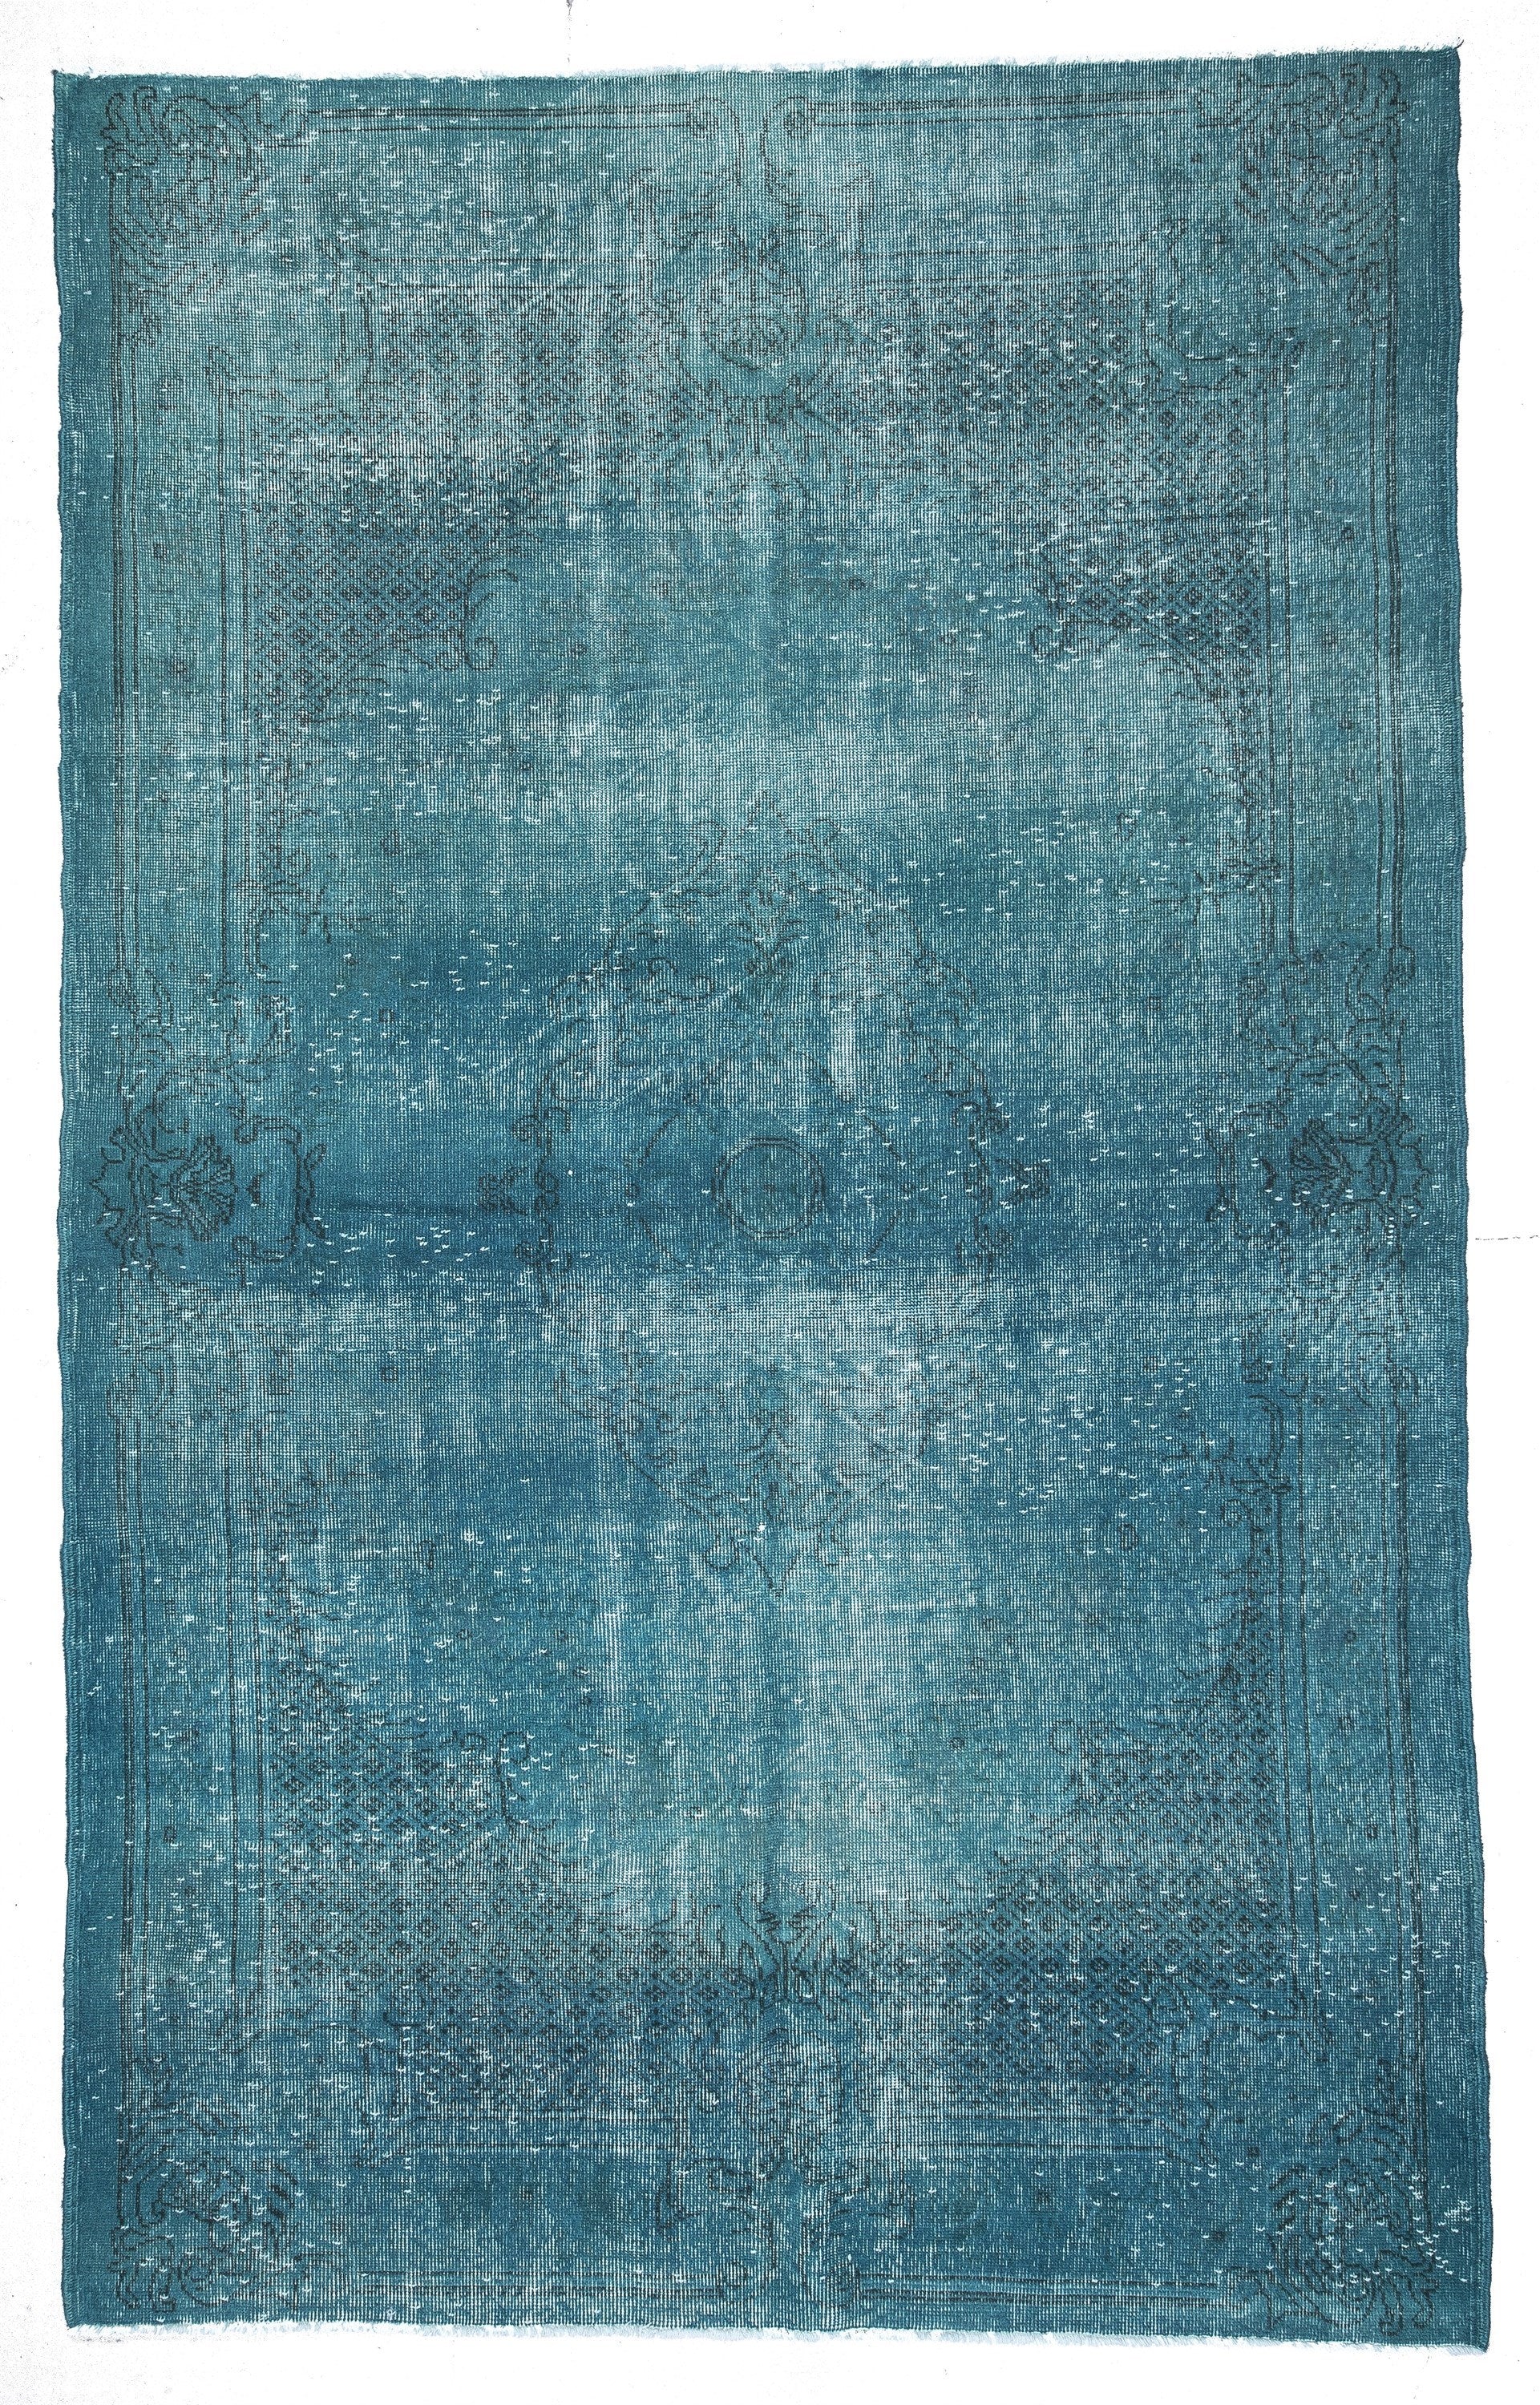 Overdyed Blue Persian Rug, Recycled Vintage Rug 9'5"x5'11"